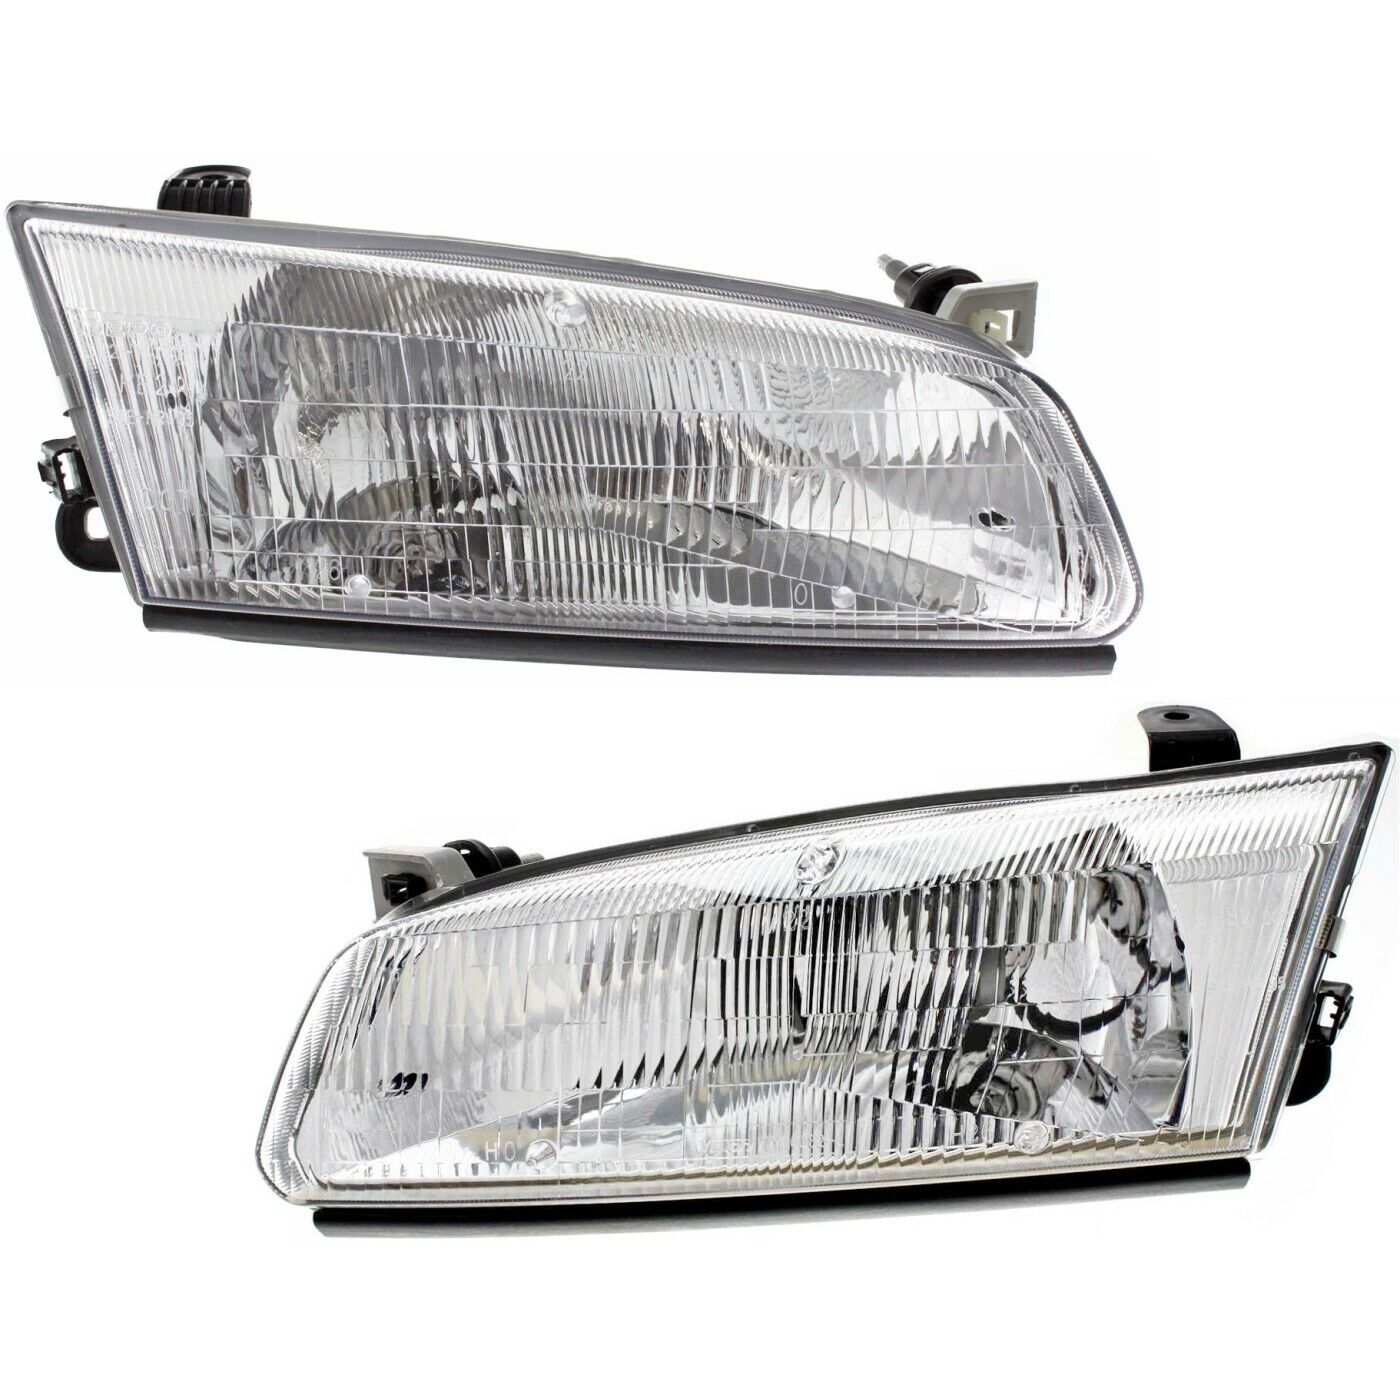 Headlight Set For 97-99 Toyota Camry Driver and Passenger Side w/ bulb